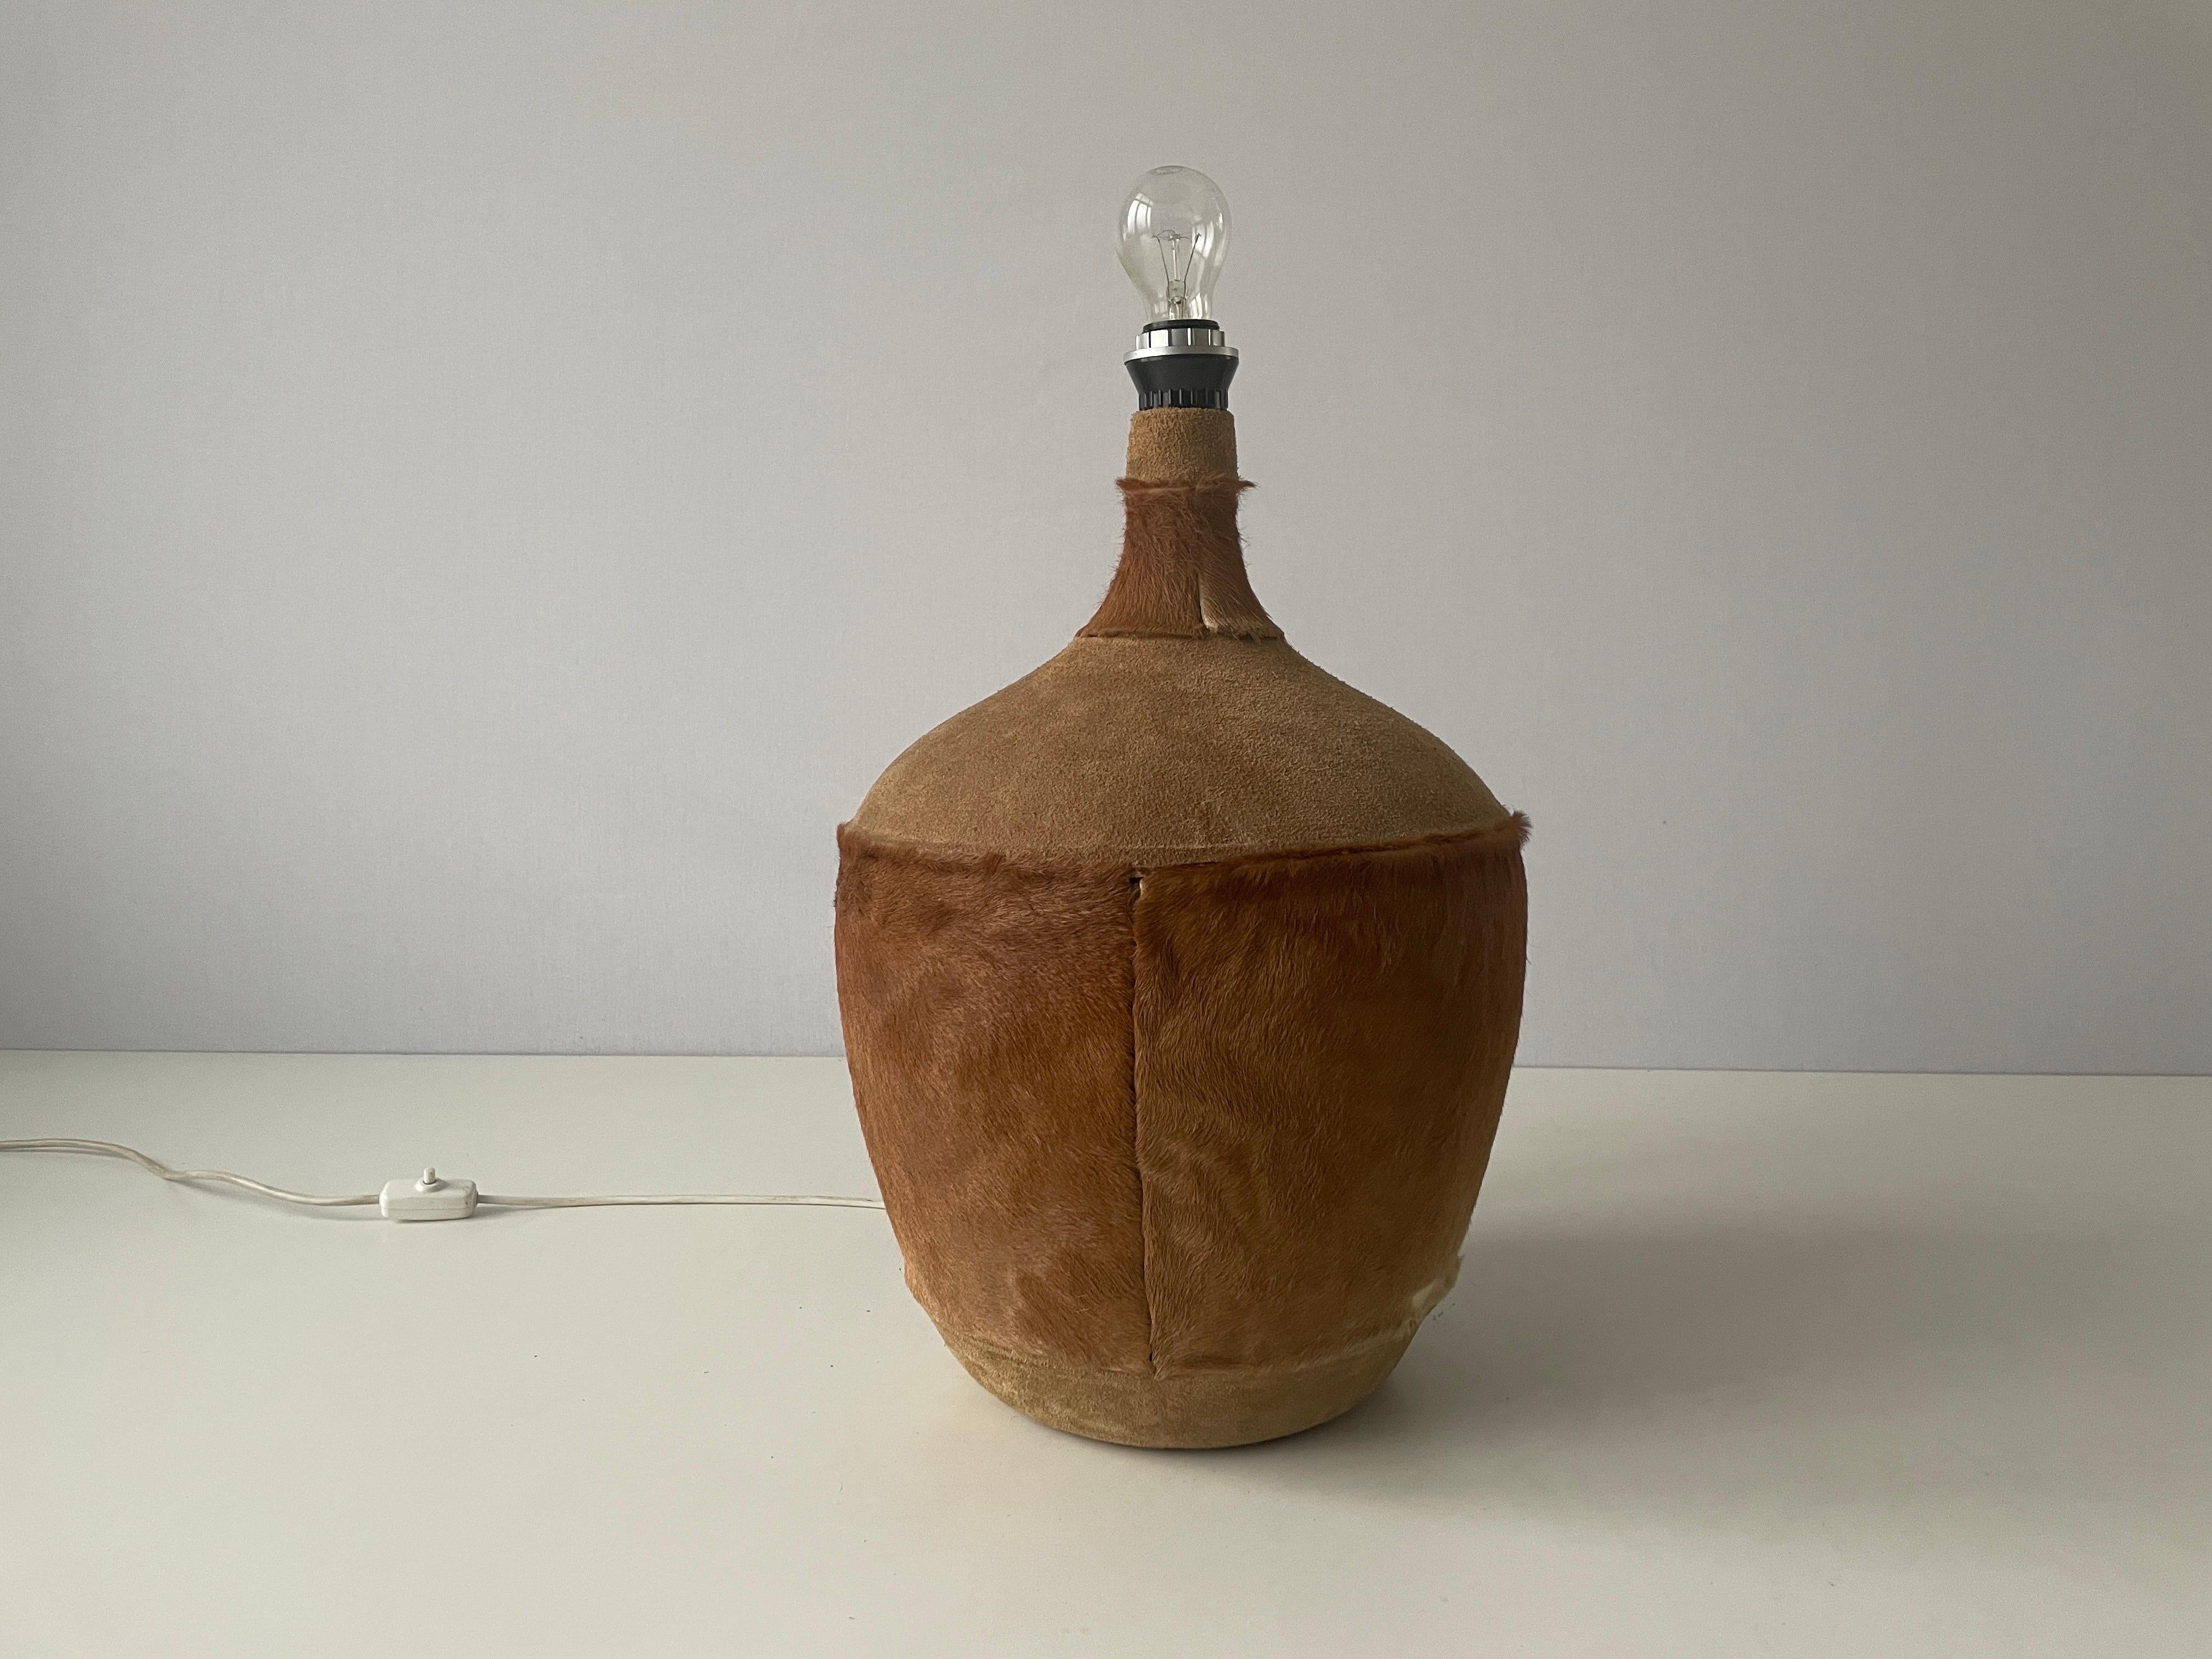 Tan Suede Leather and Glass Shade Floor or Table Lamp, 1960s, Denmark For Sale 2